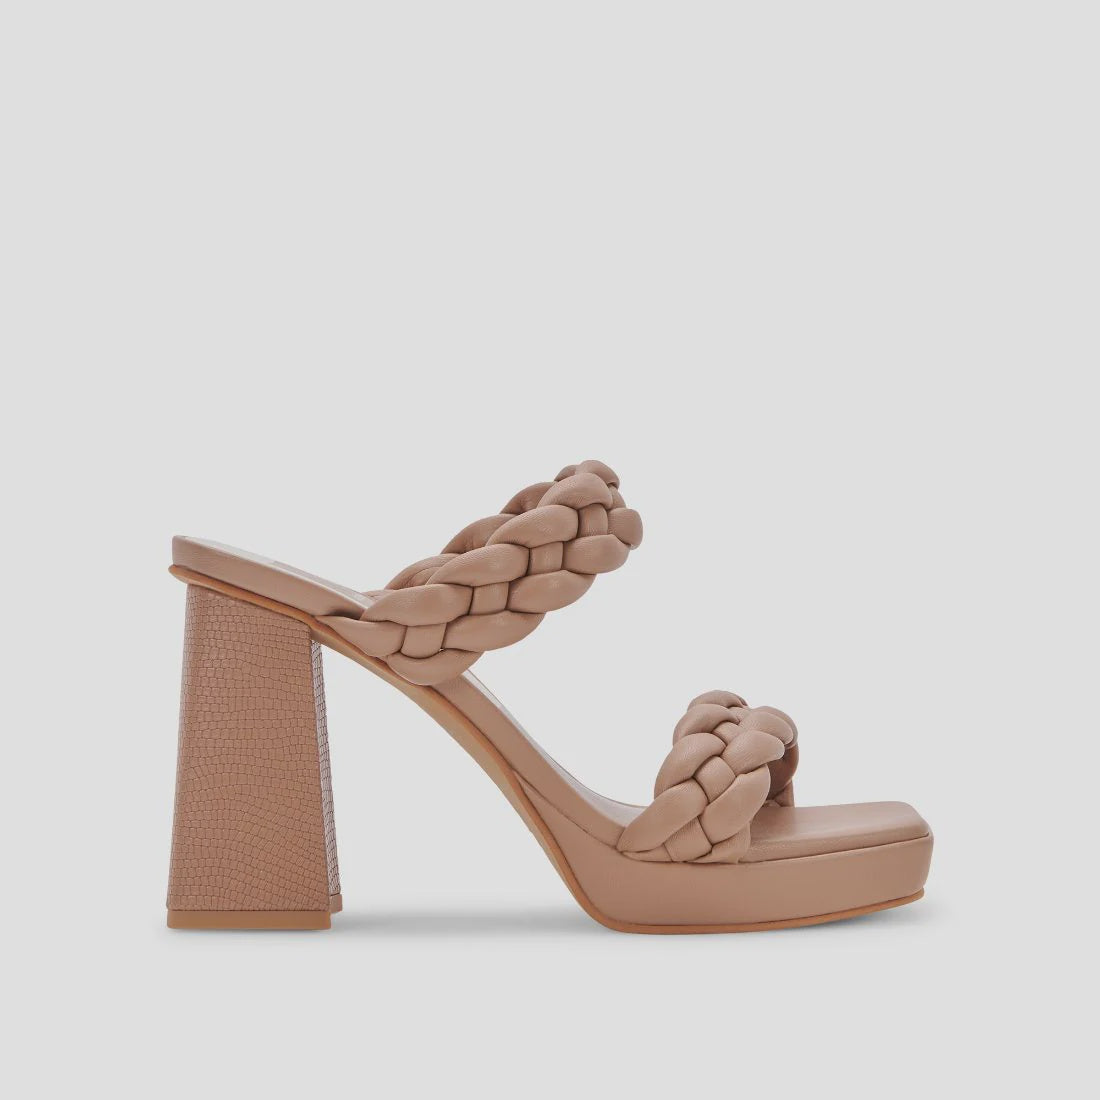 DOLCE VITA - ASHBY SANDAL IN CAFE SYNTHETIC LEATHER